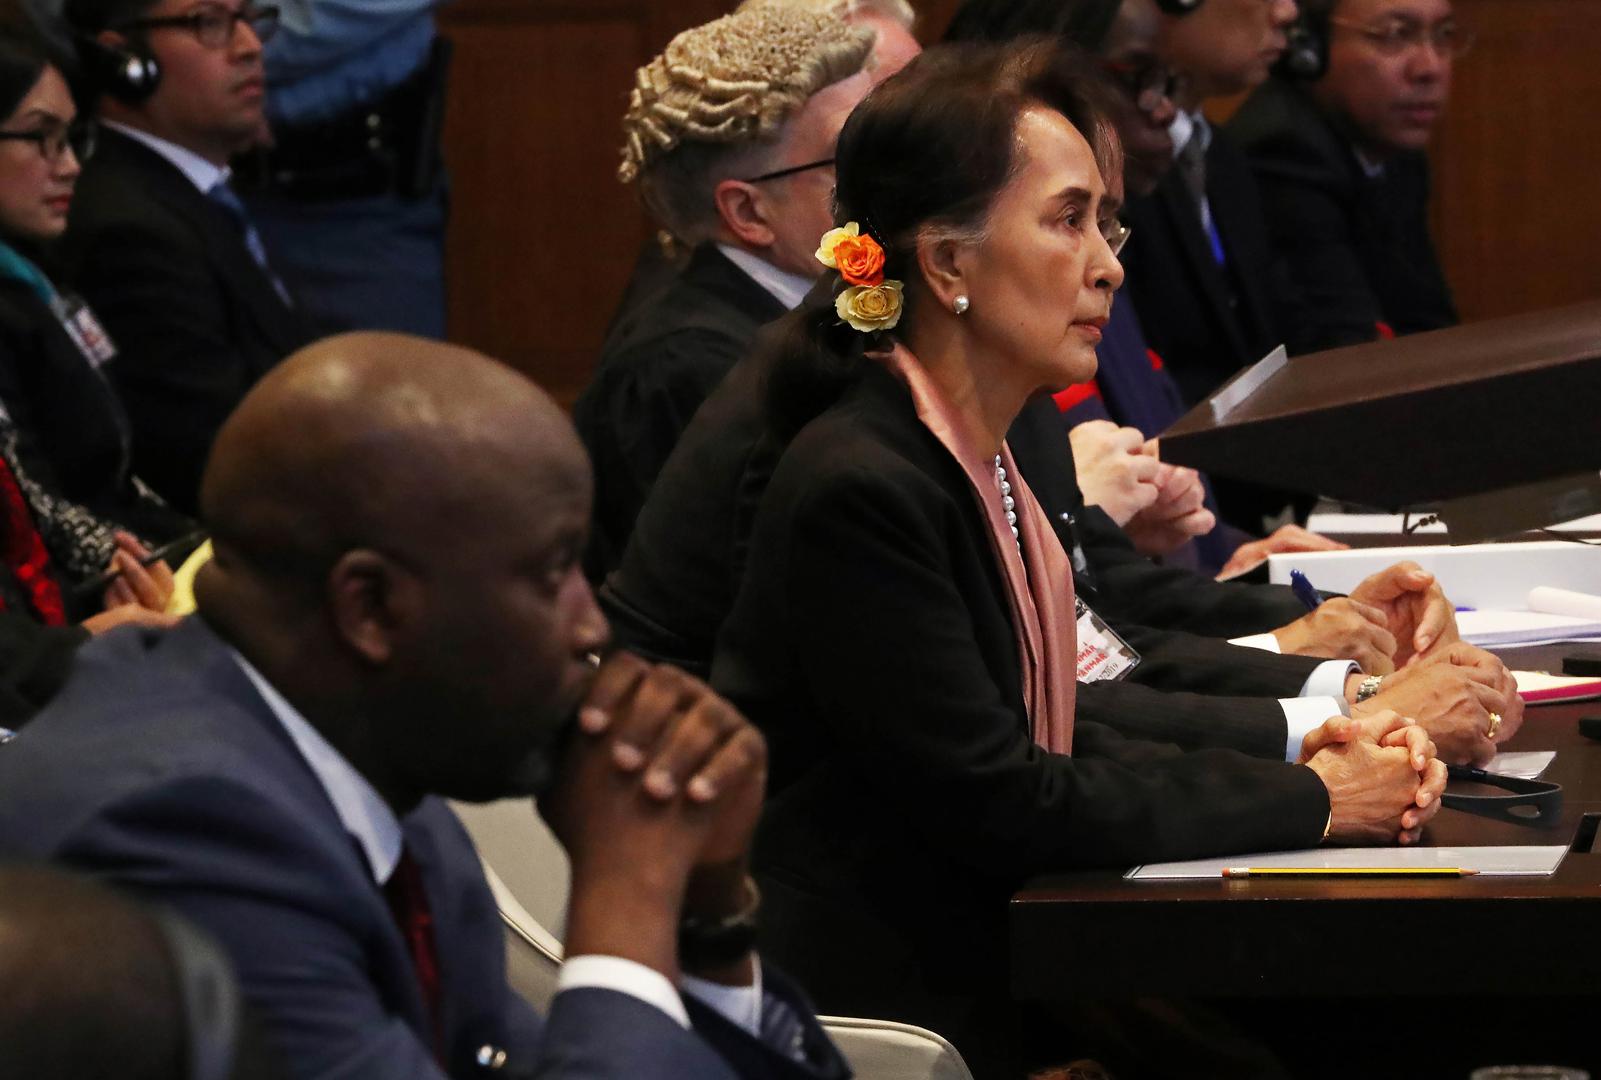 Gambia's Justice Minister Abubacarr Tambadou and Myanmar's leader Aung San Suu Kyi attend a hearing in a case filed by Gambia against Myanmar alleging genocide against the minority Muslim Rohingya population, at the International Court of Justice (ICJ).